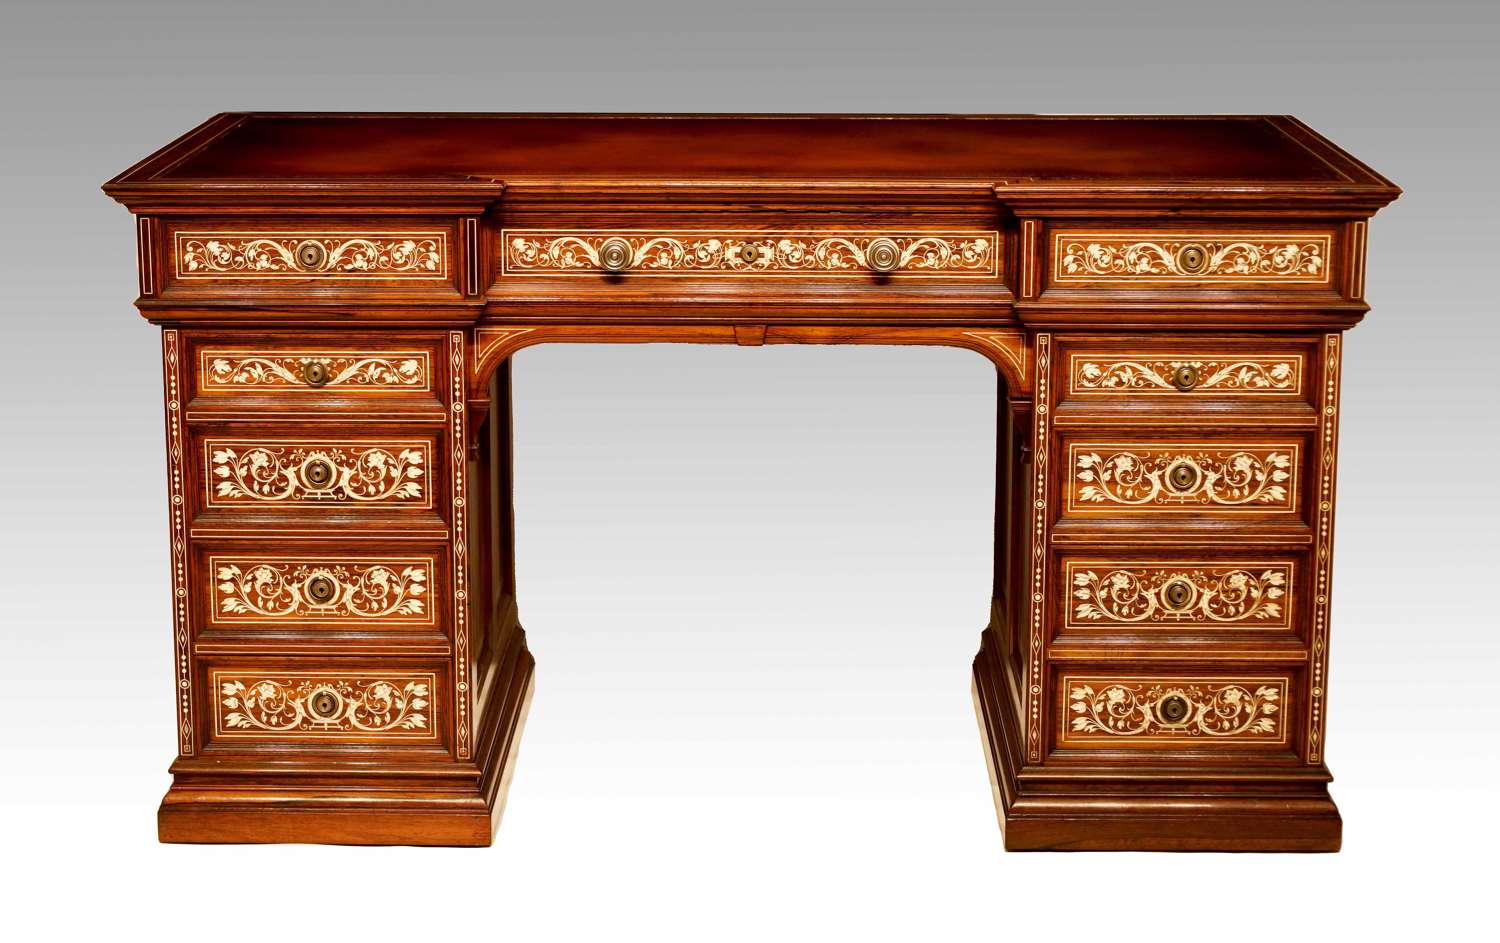 An Exhibition Quality Inlaid Rosewood Pedestal Desk By Howard & Sons